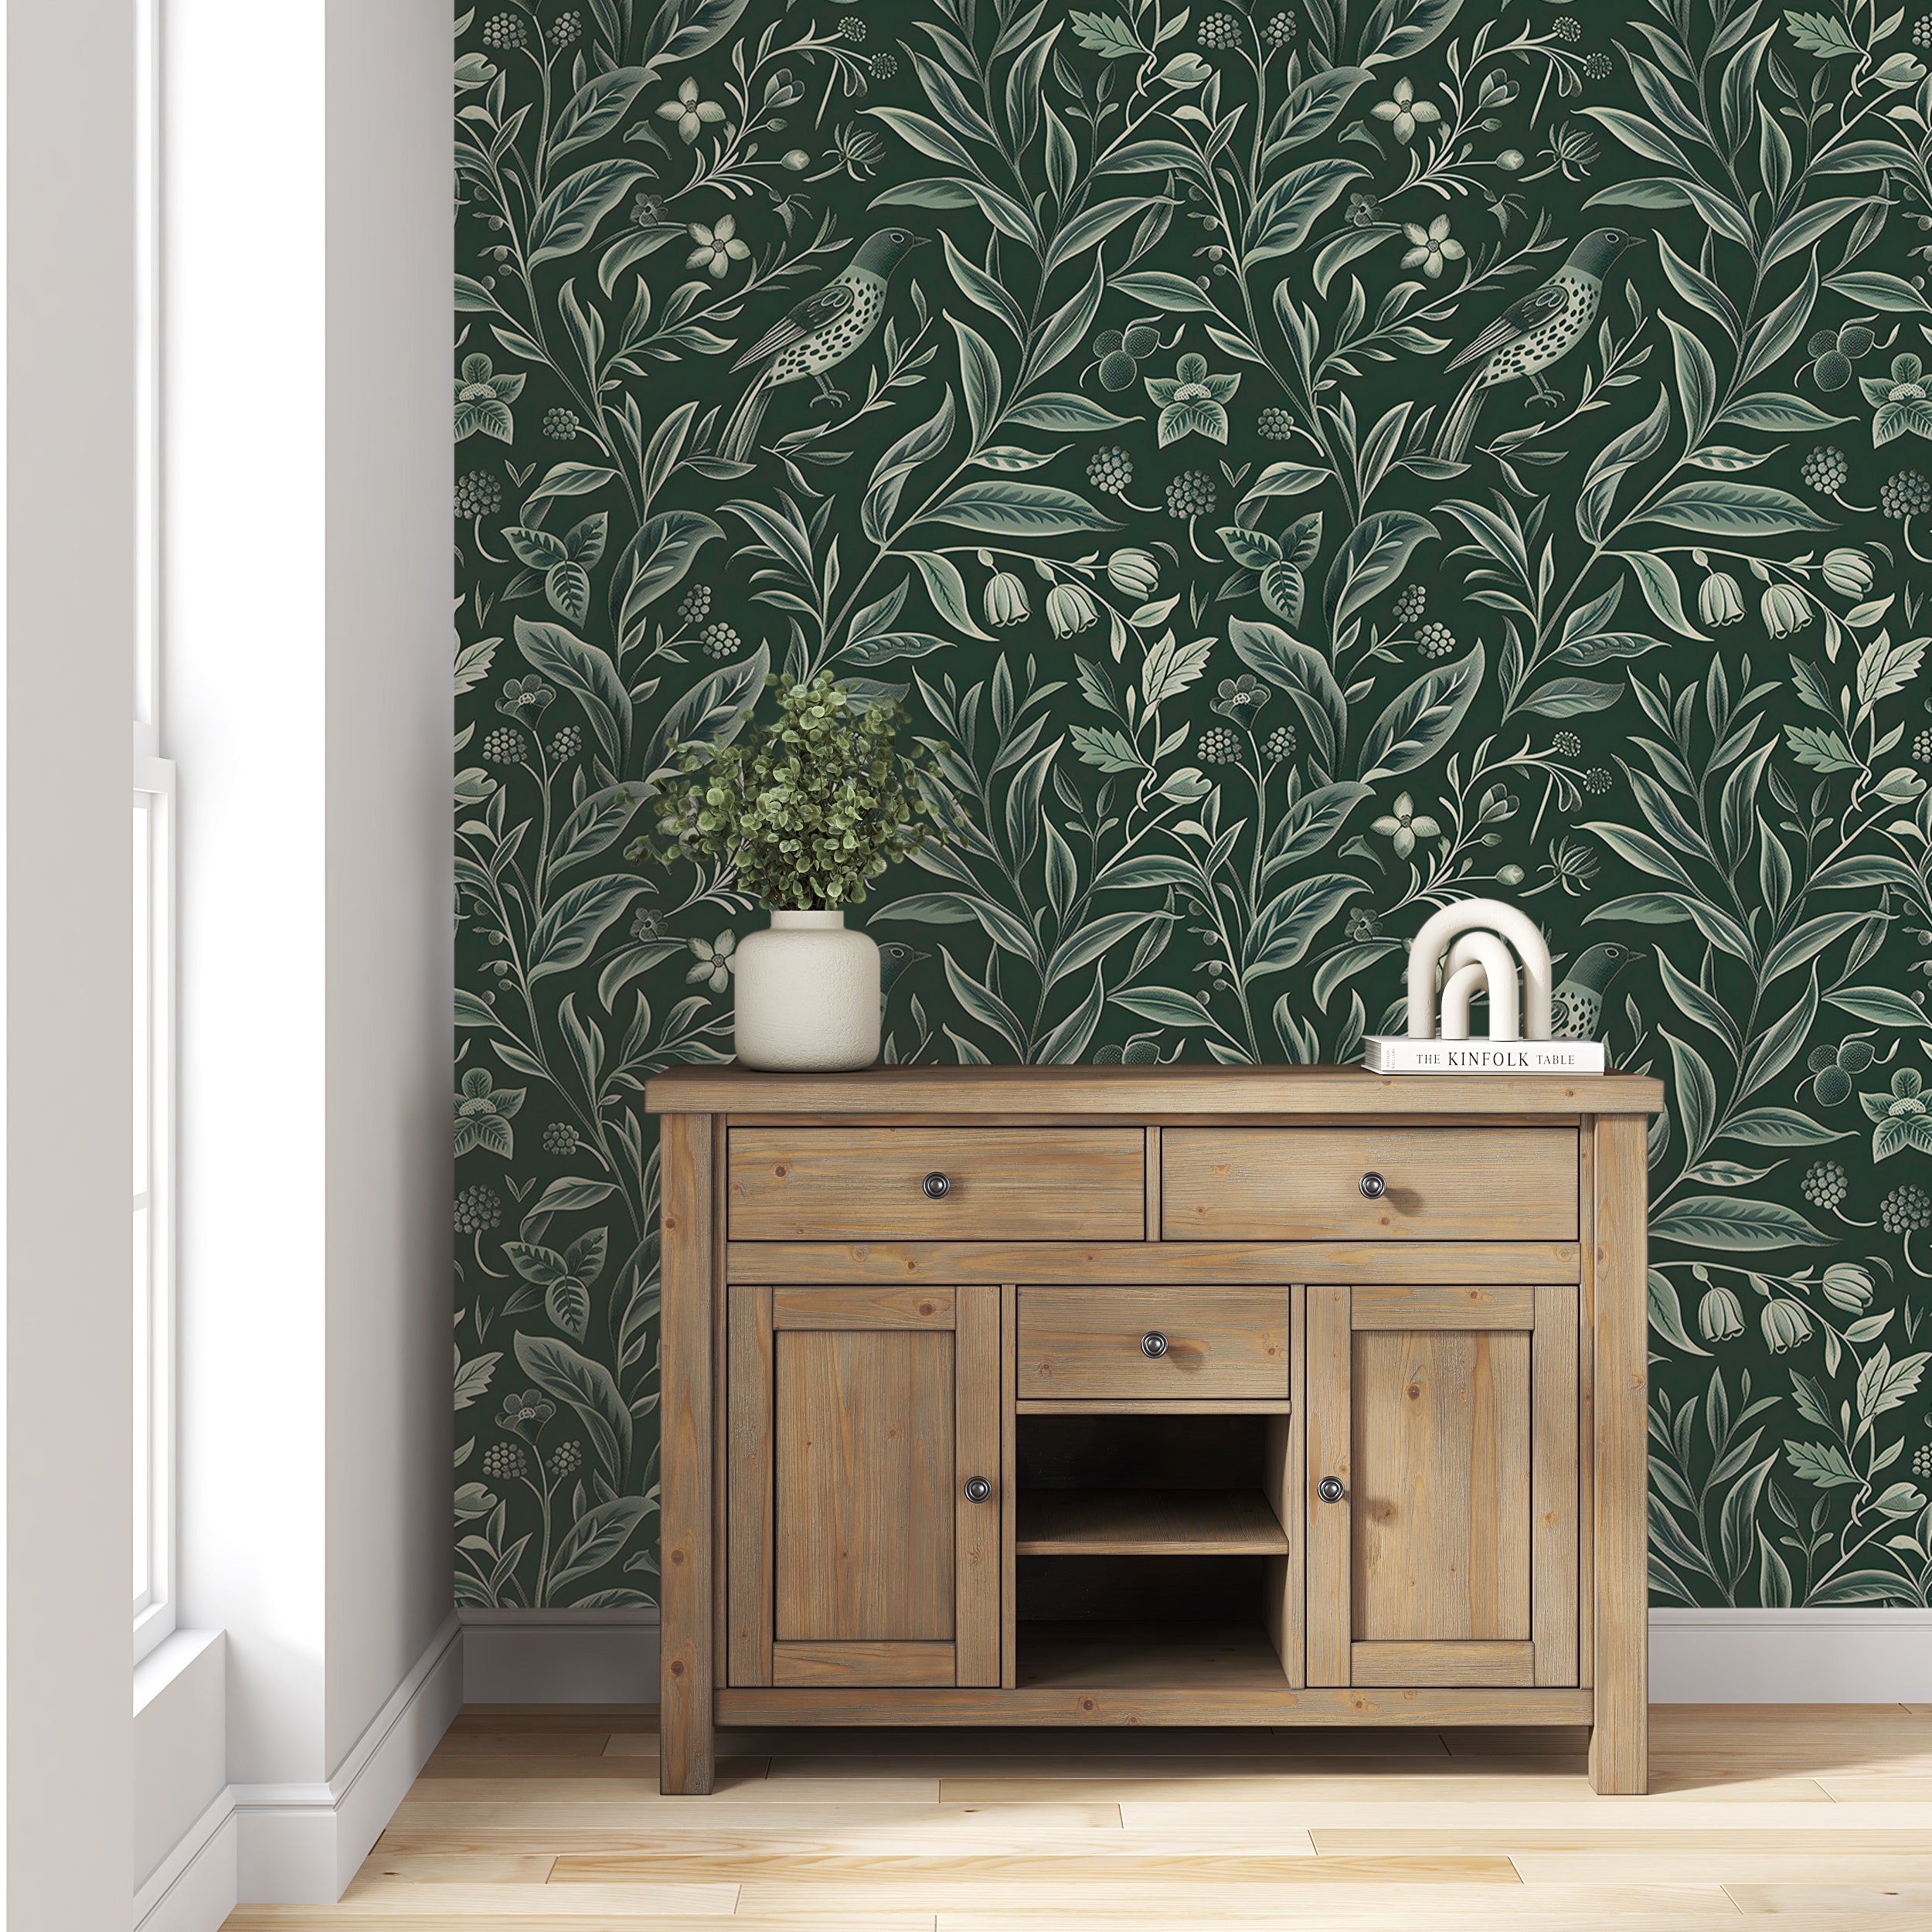 Vintage Green Floral Wallpaper, Dark Green Botanical Classic Wall Decal, Peel and Stick Chinoiserie Wallpaper, Removable Bird and Leaves Pattern